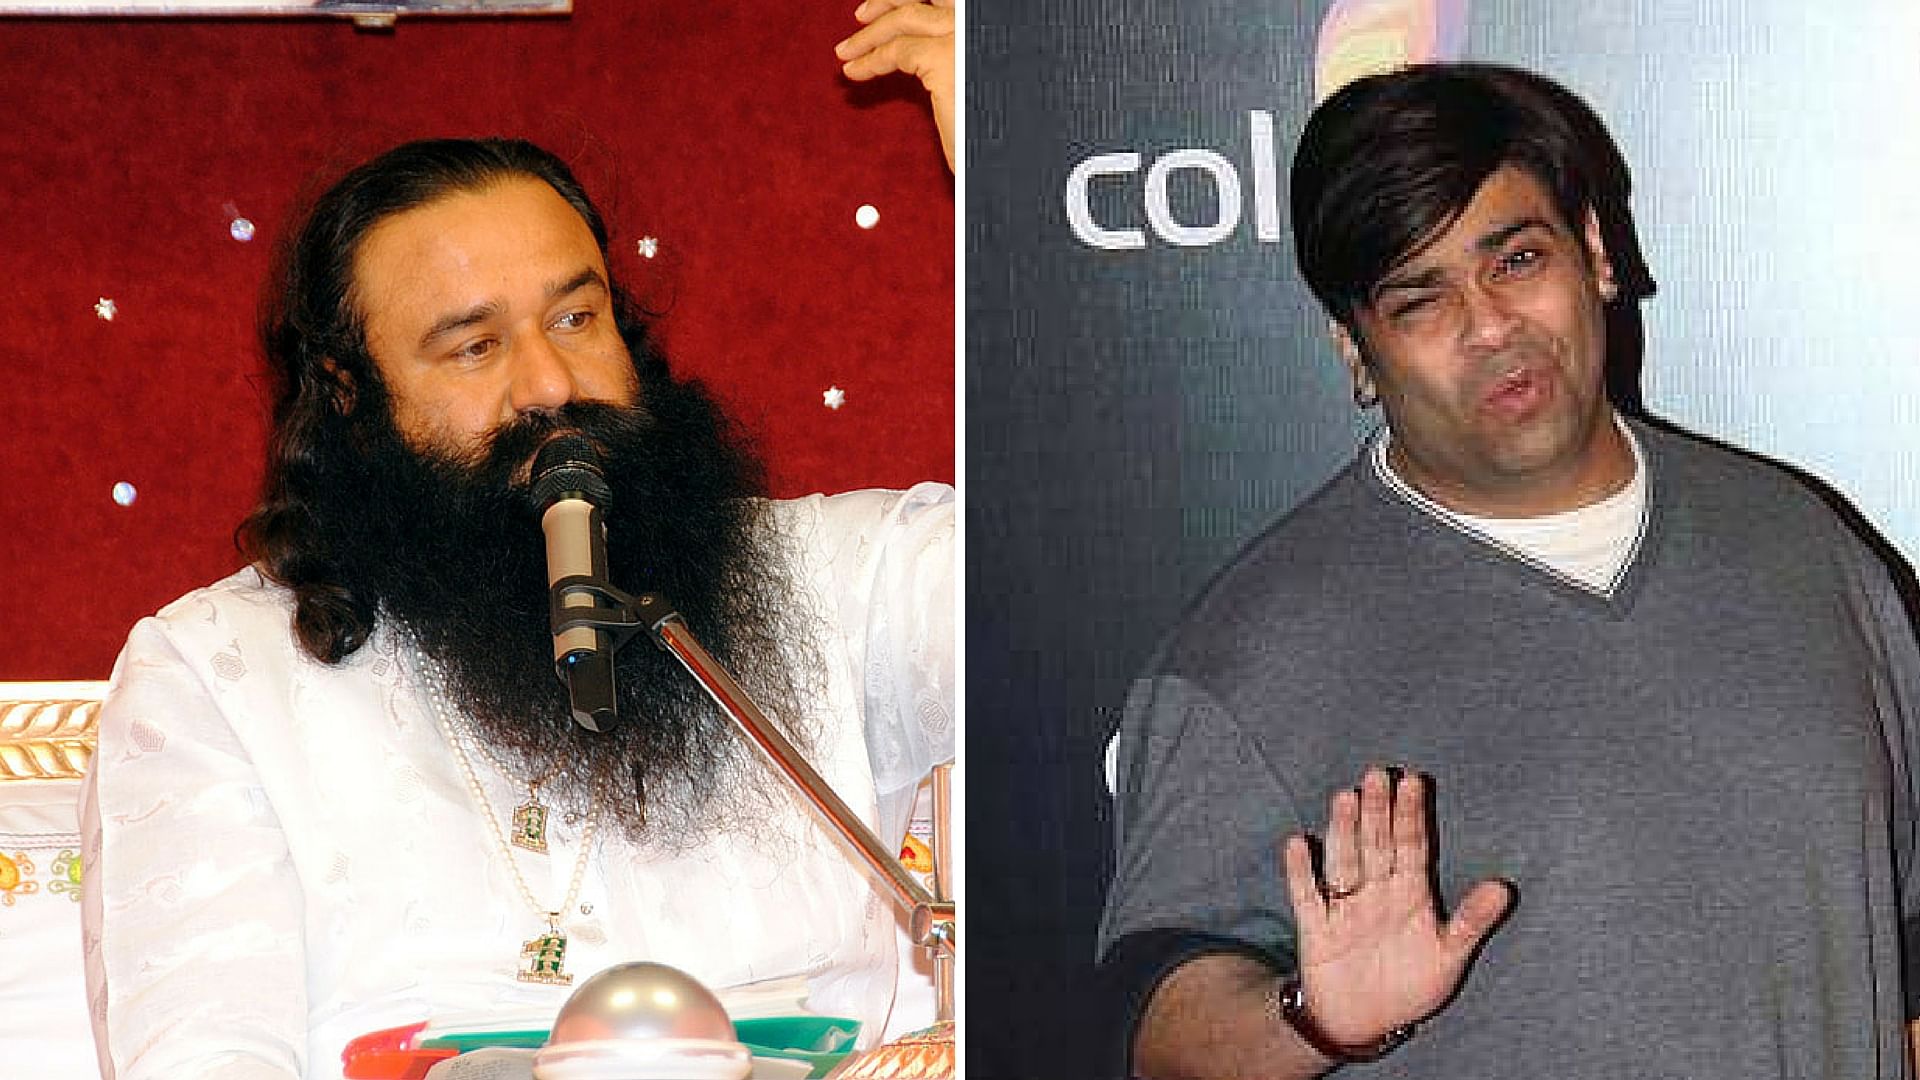 Comedian Kiku Sharda (right) was arrested, released on bail and arrested again for mimicking controversial godman Gurmeet Ram Rahim Singh. (Photo altered by <b>The Quint</b>)